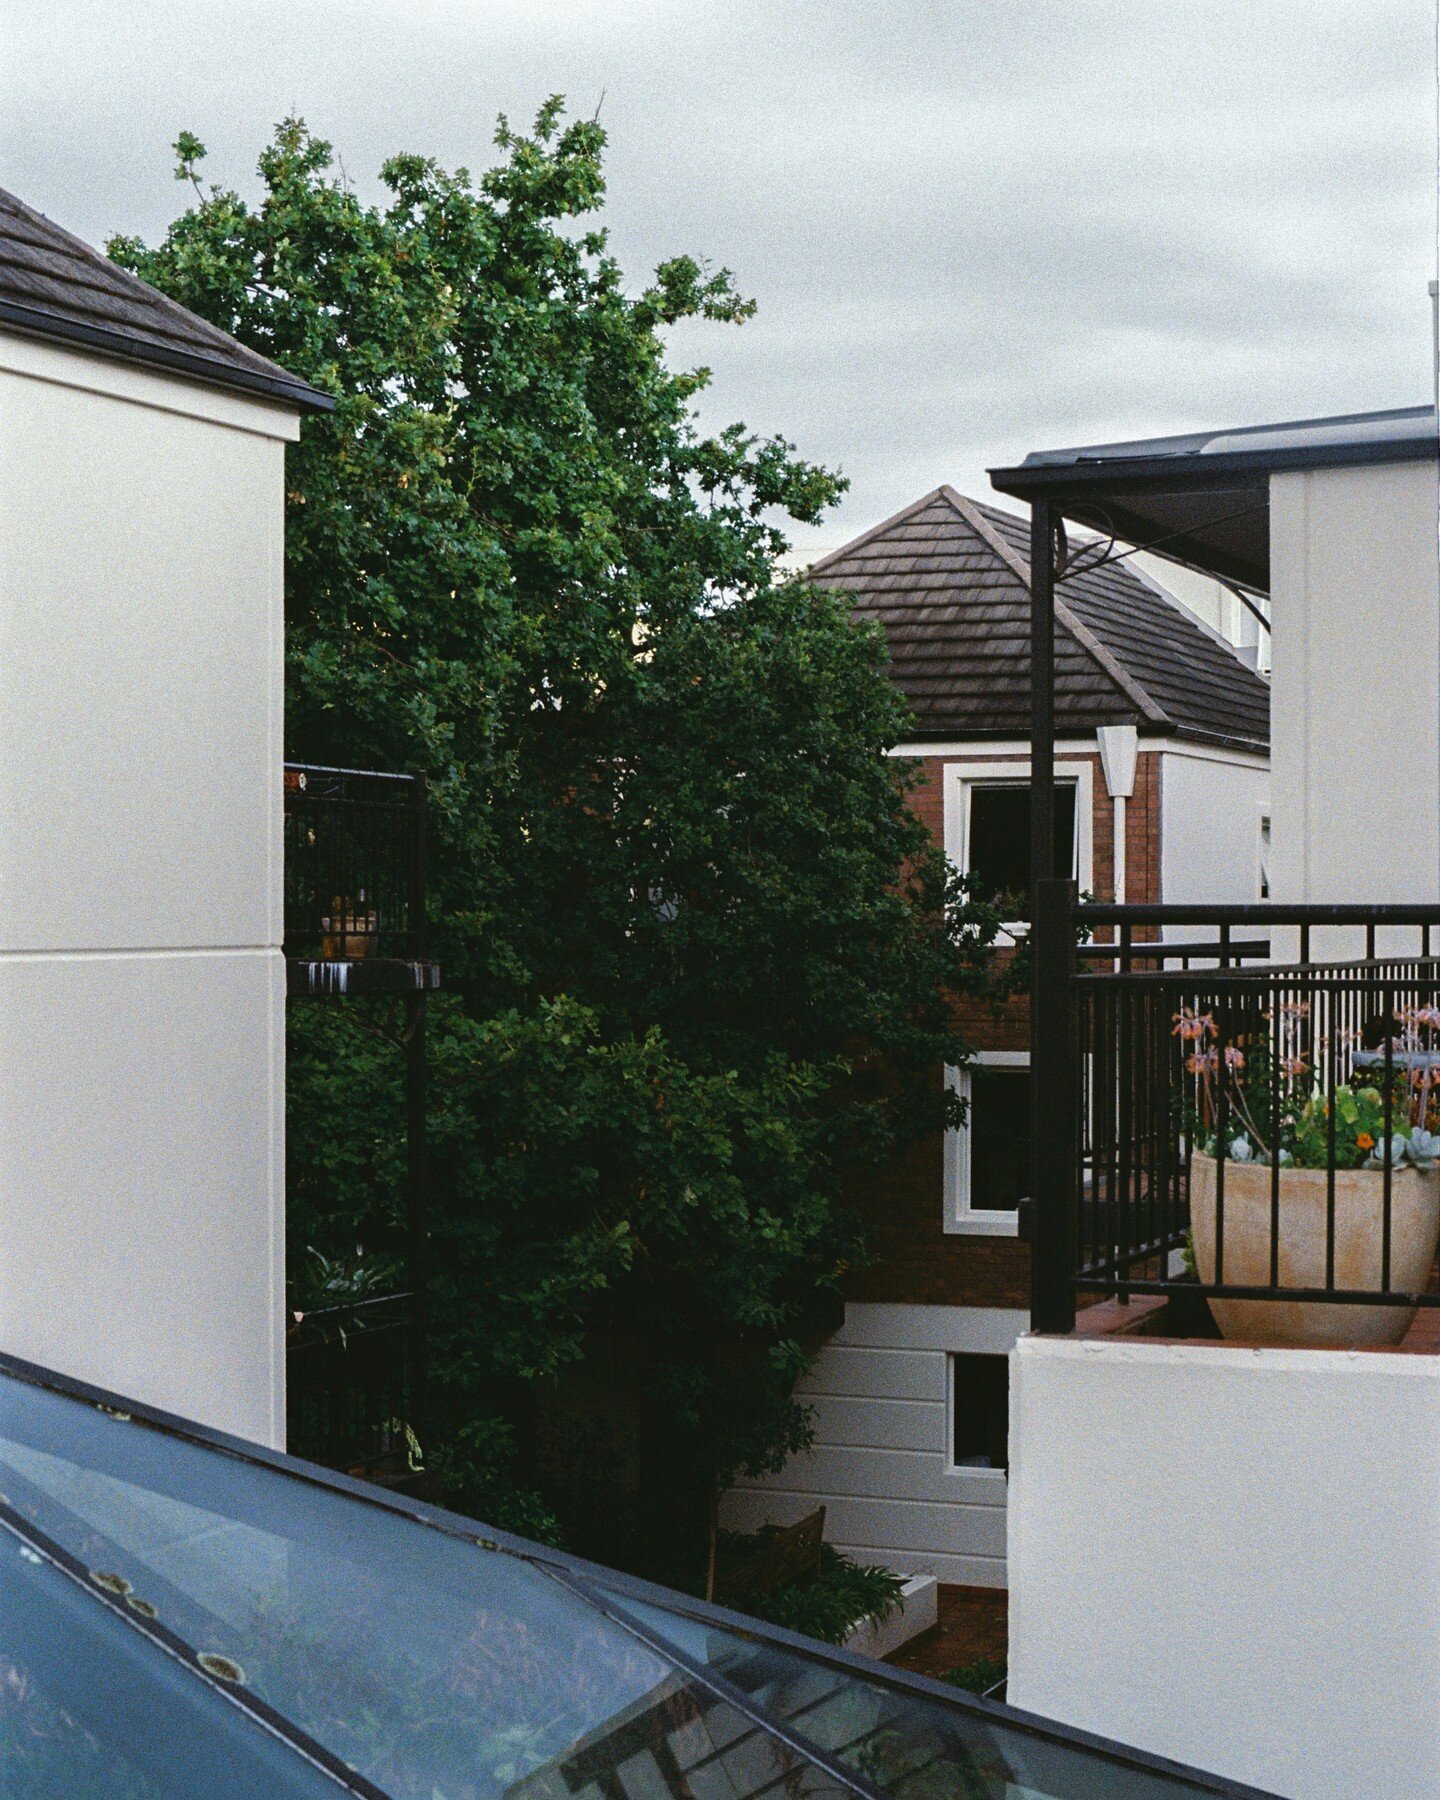 A beautiful set of townhouses near Royal Park Golf Course. The browns in the brick and tiles complement the greenery sublimely, and using Ultramax brought out the vibrancy very well.
📷: Minolta X-500
🔎: MD Rokkor 50mm F1.4
🎞️: Kodak Ultramax 400
&